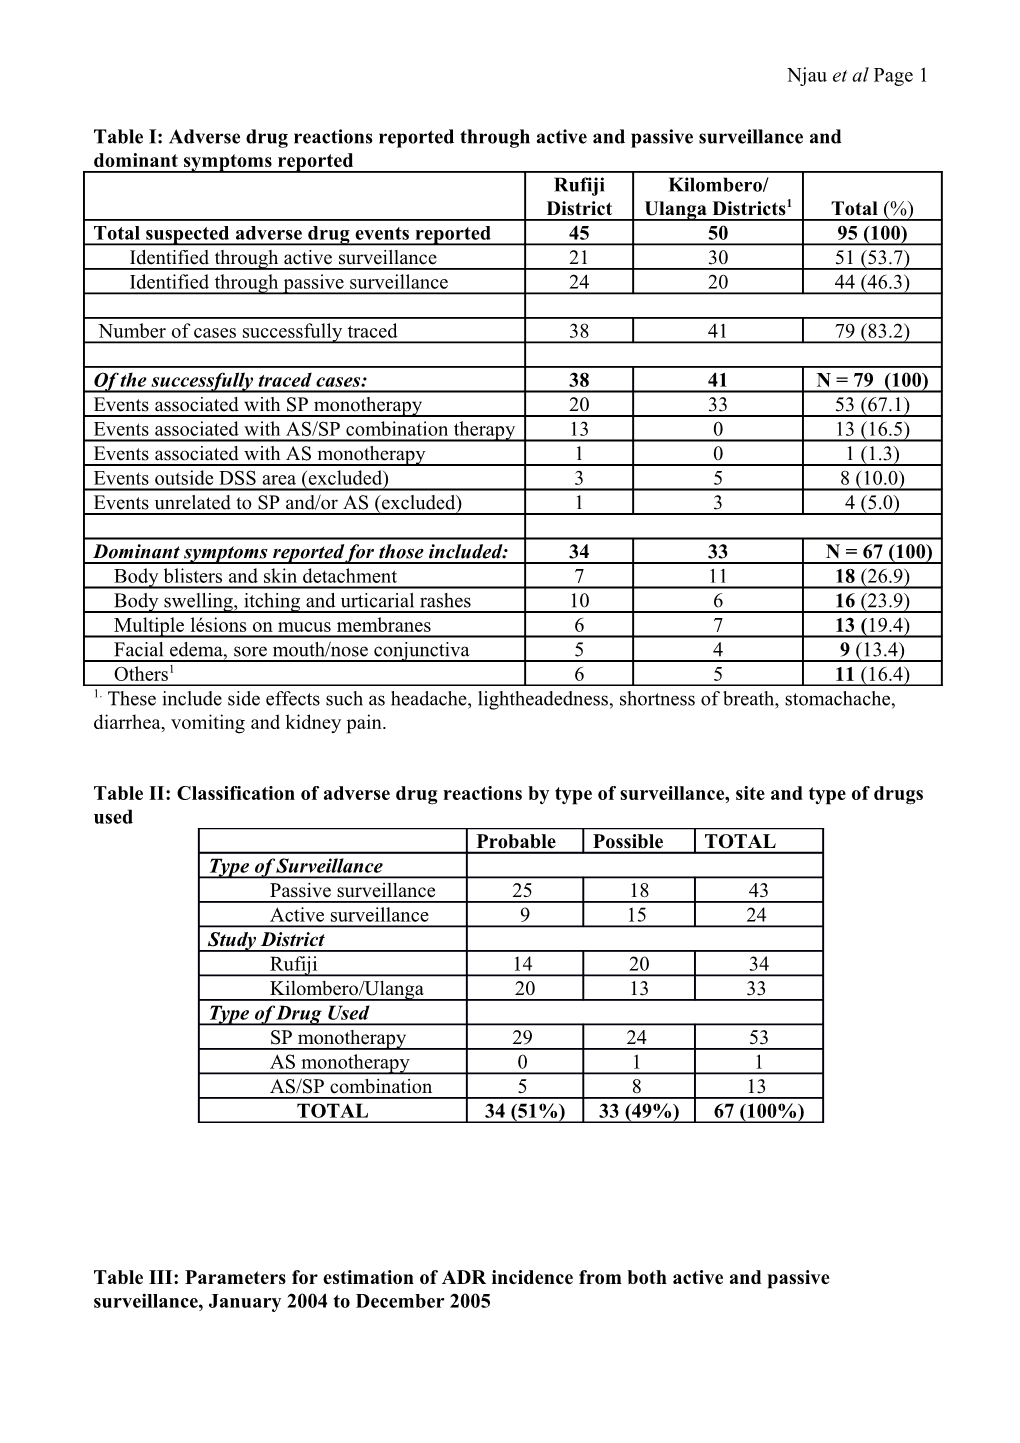 Table I: Adverse Drug Reactions Reported Through Active and Passive Surveillance and Dominant